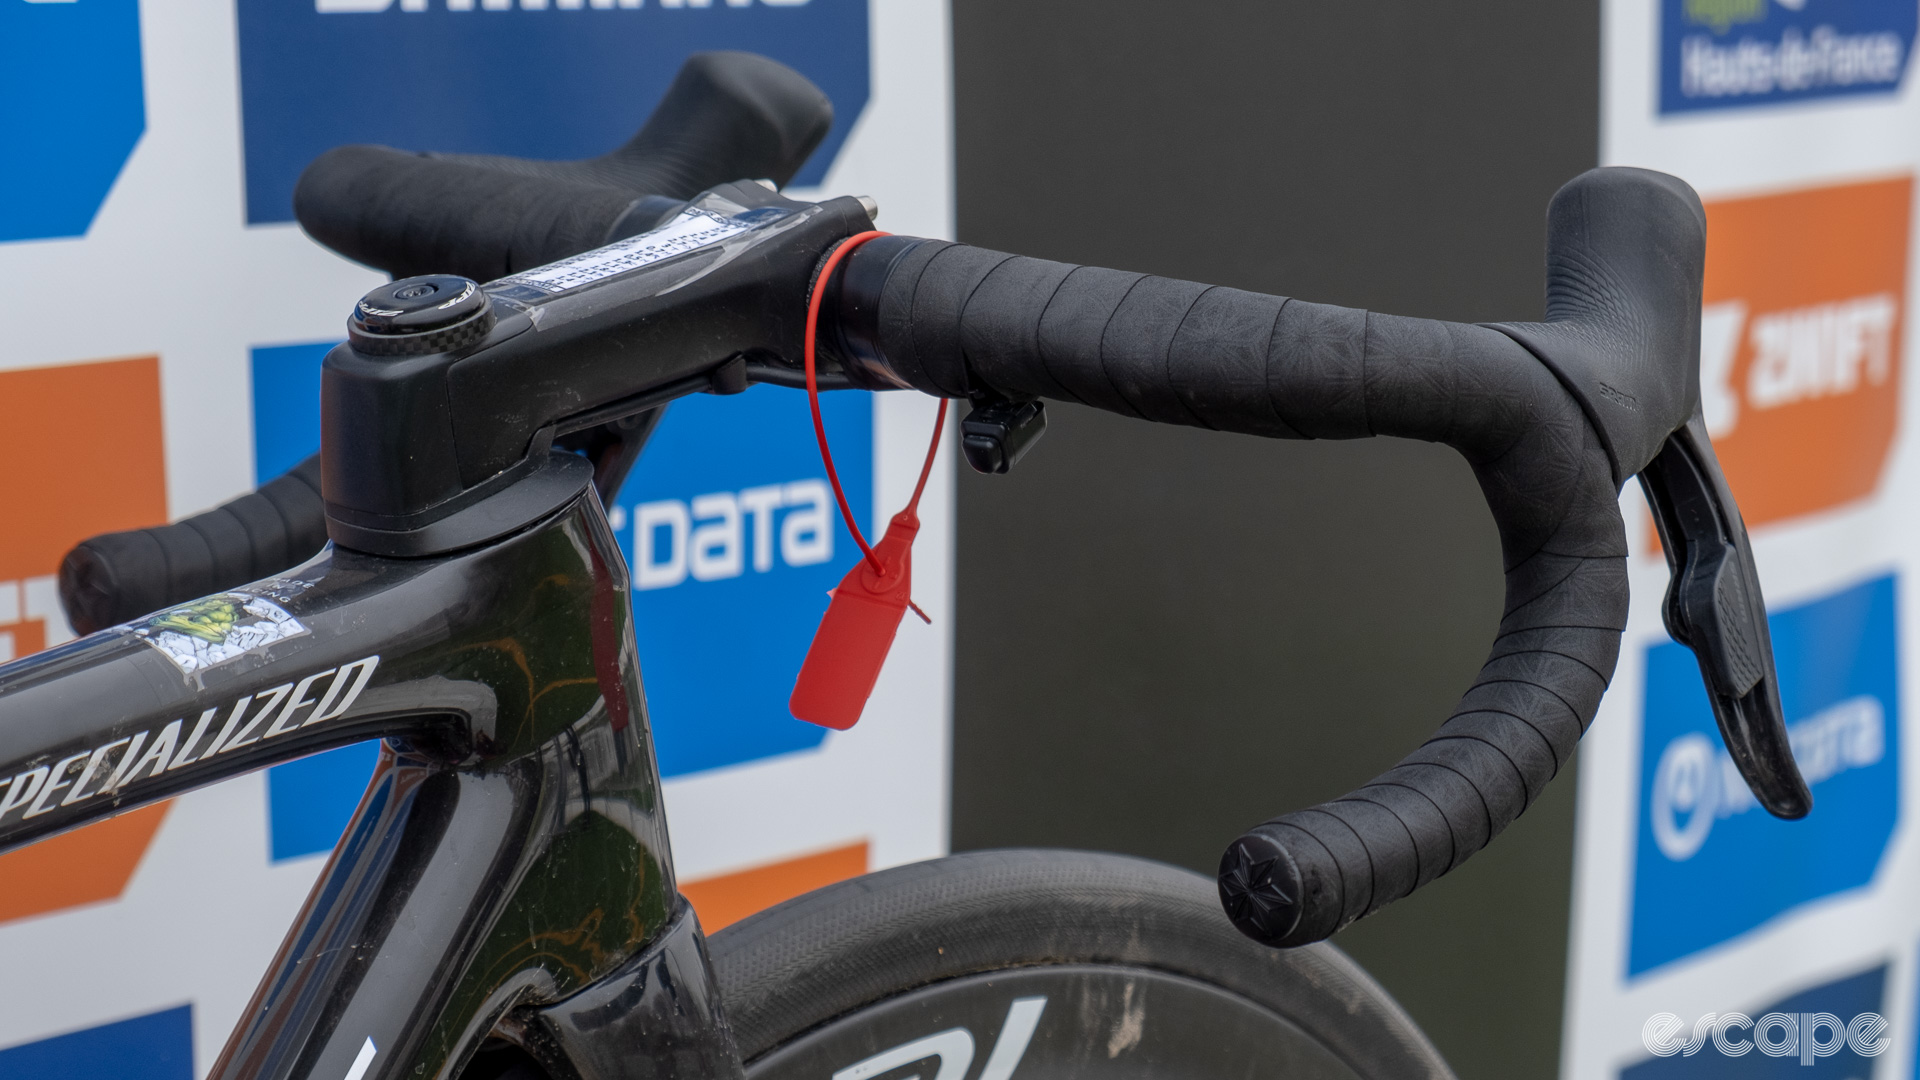 The image shows Lotte Kopecky's handlebars and stem